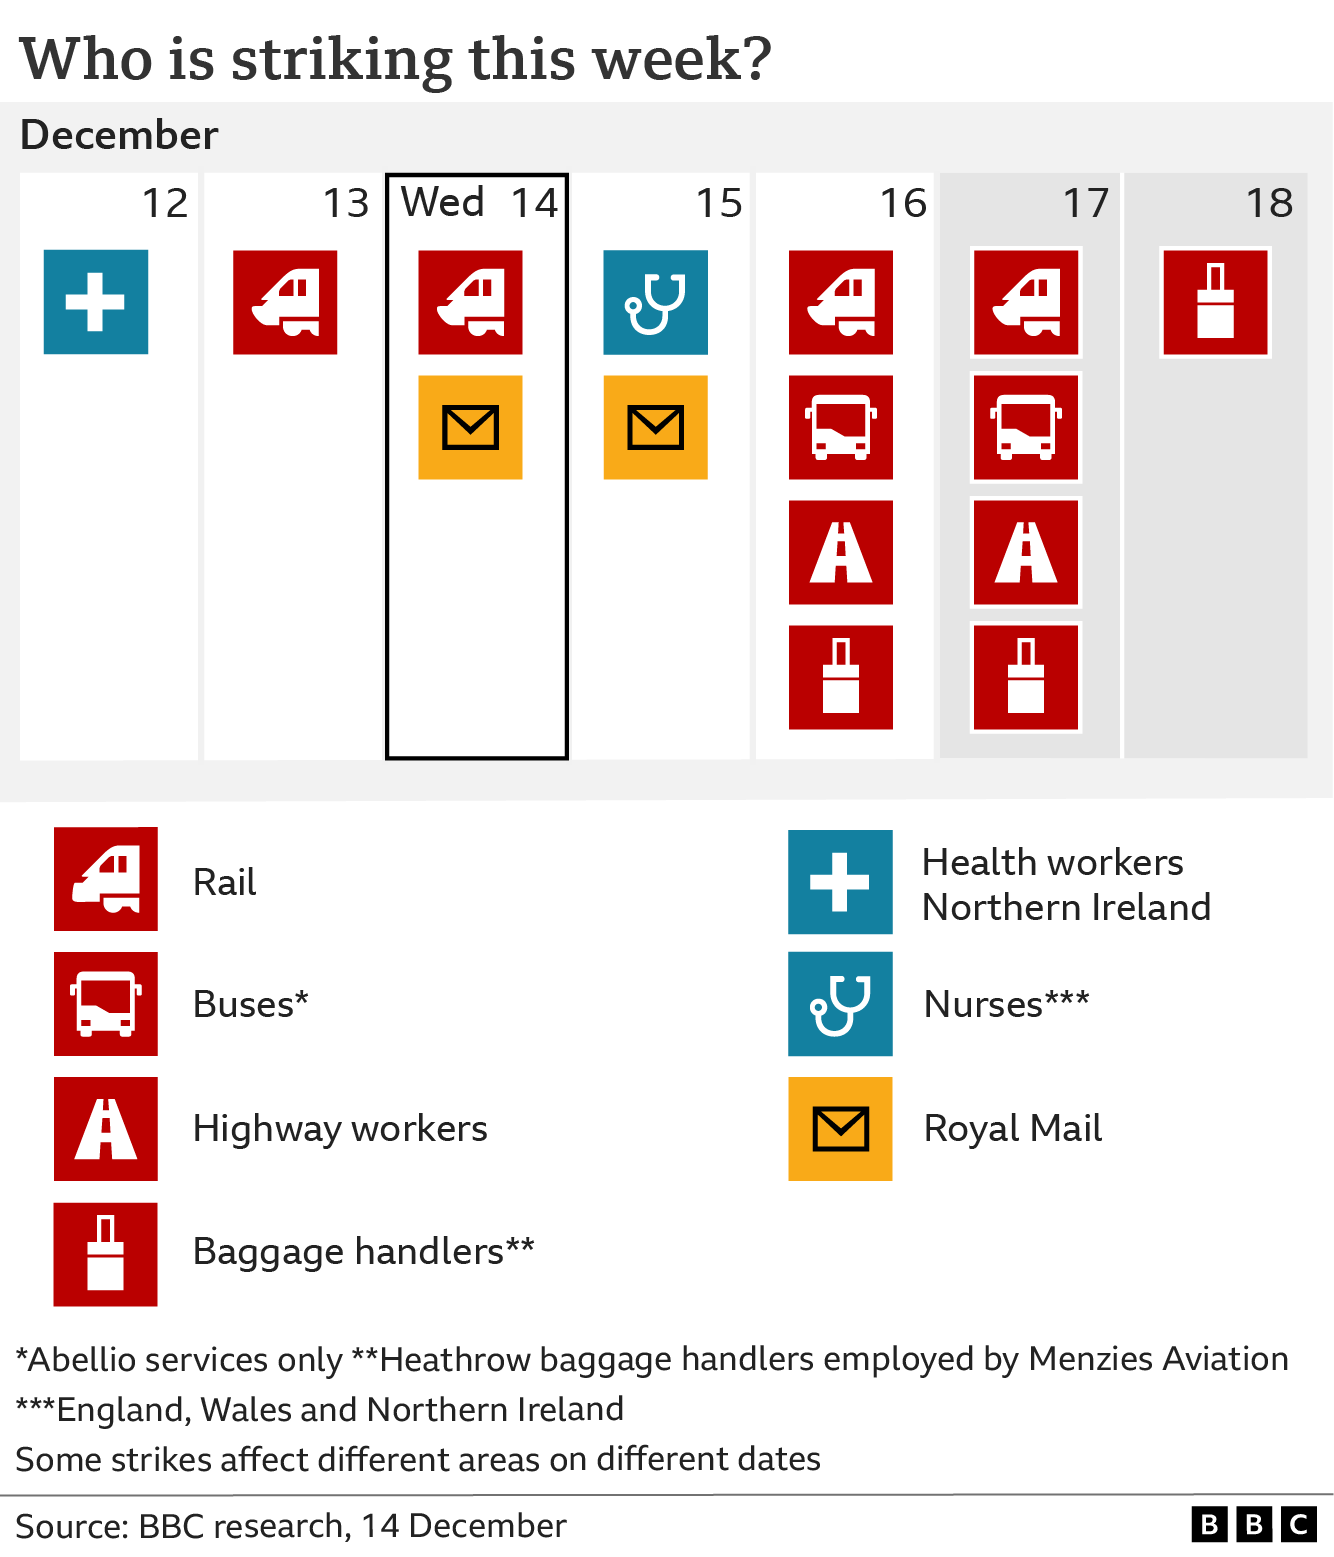 Chart - Who is striking this week? Industrial action in the week starting with 12 December include rail strikes on Tuesday, Wednesday, on Friday and Saturday when they will be joined by some bus companies. Royal Mail workers will strike on Wednesday and Thursday. Nurses will strike on Thursday and in Northern Ireland, healthcare workers will strike on Monday.